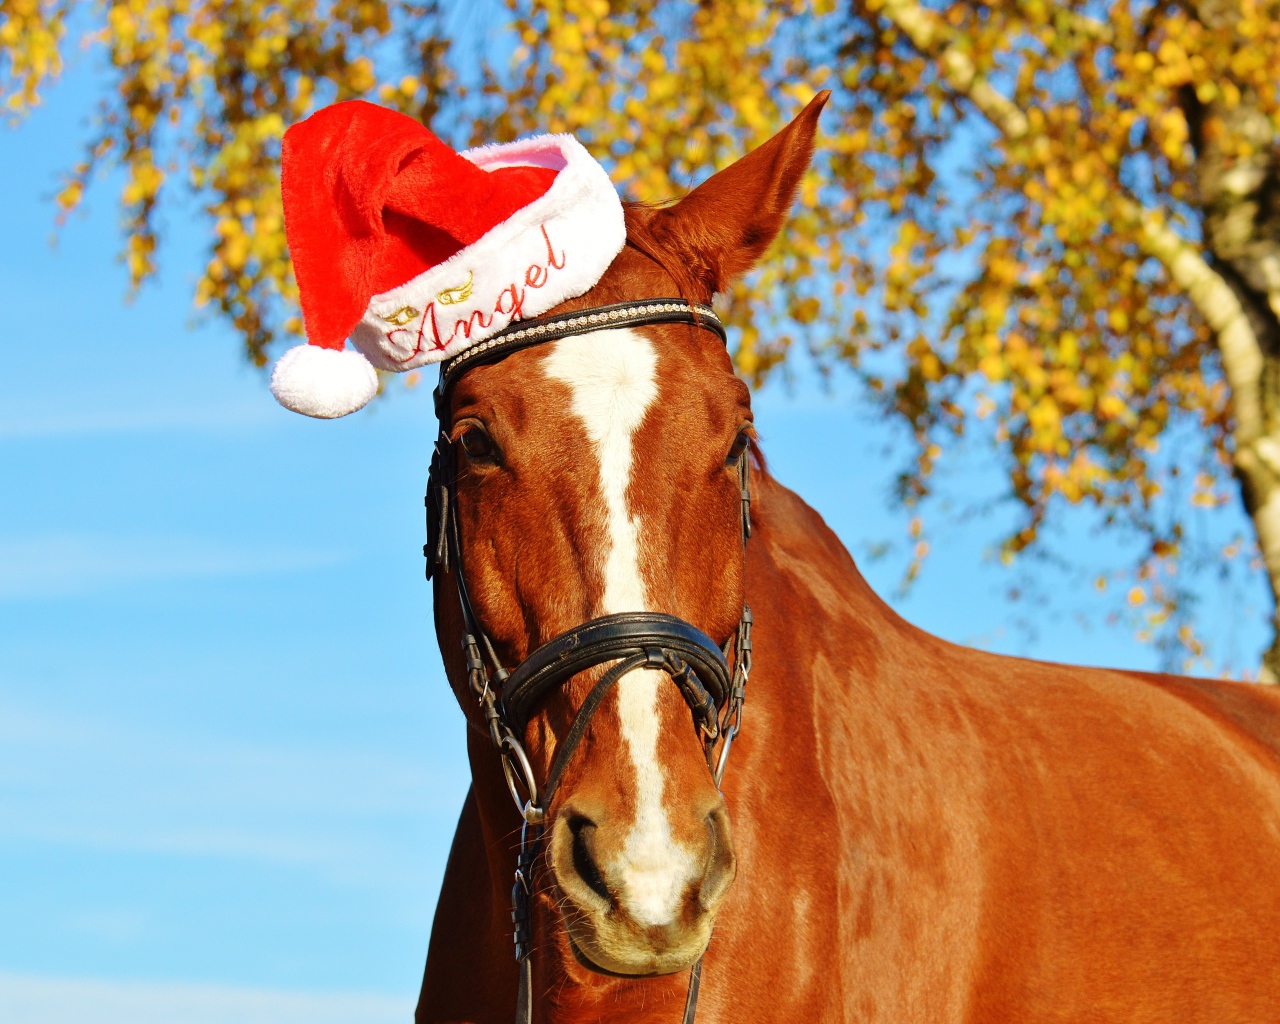 Big brown horse in a red hat